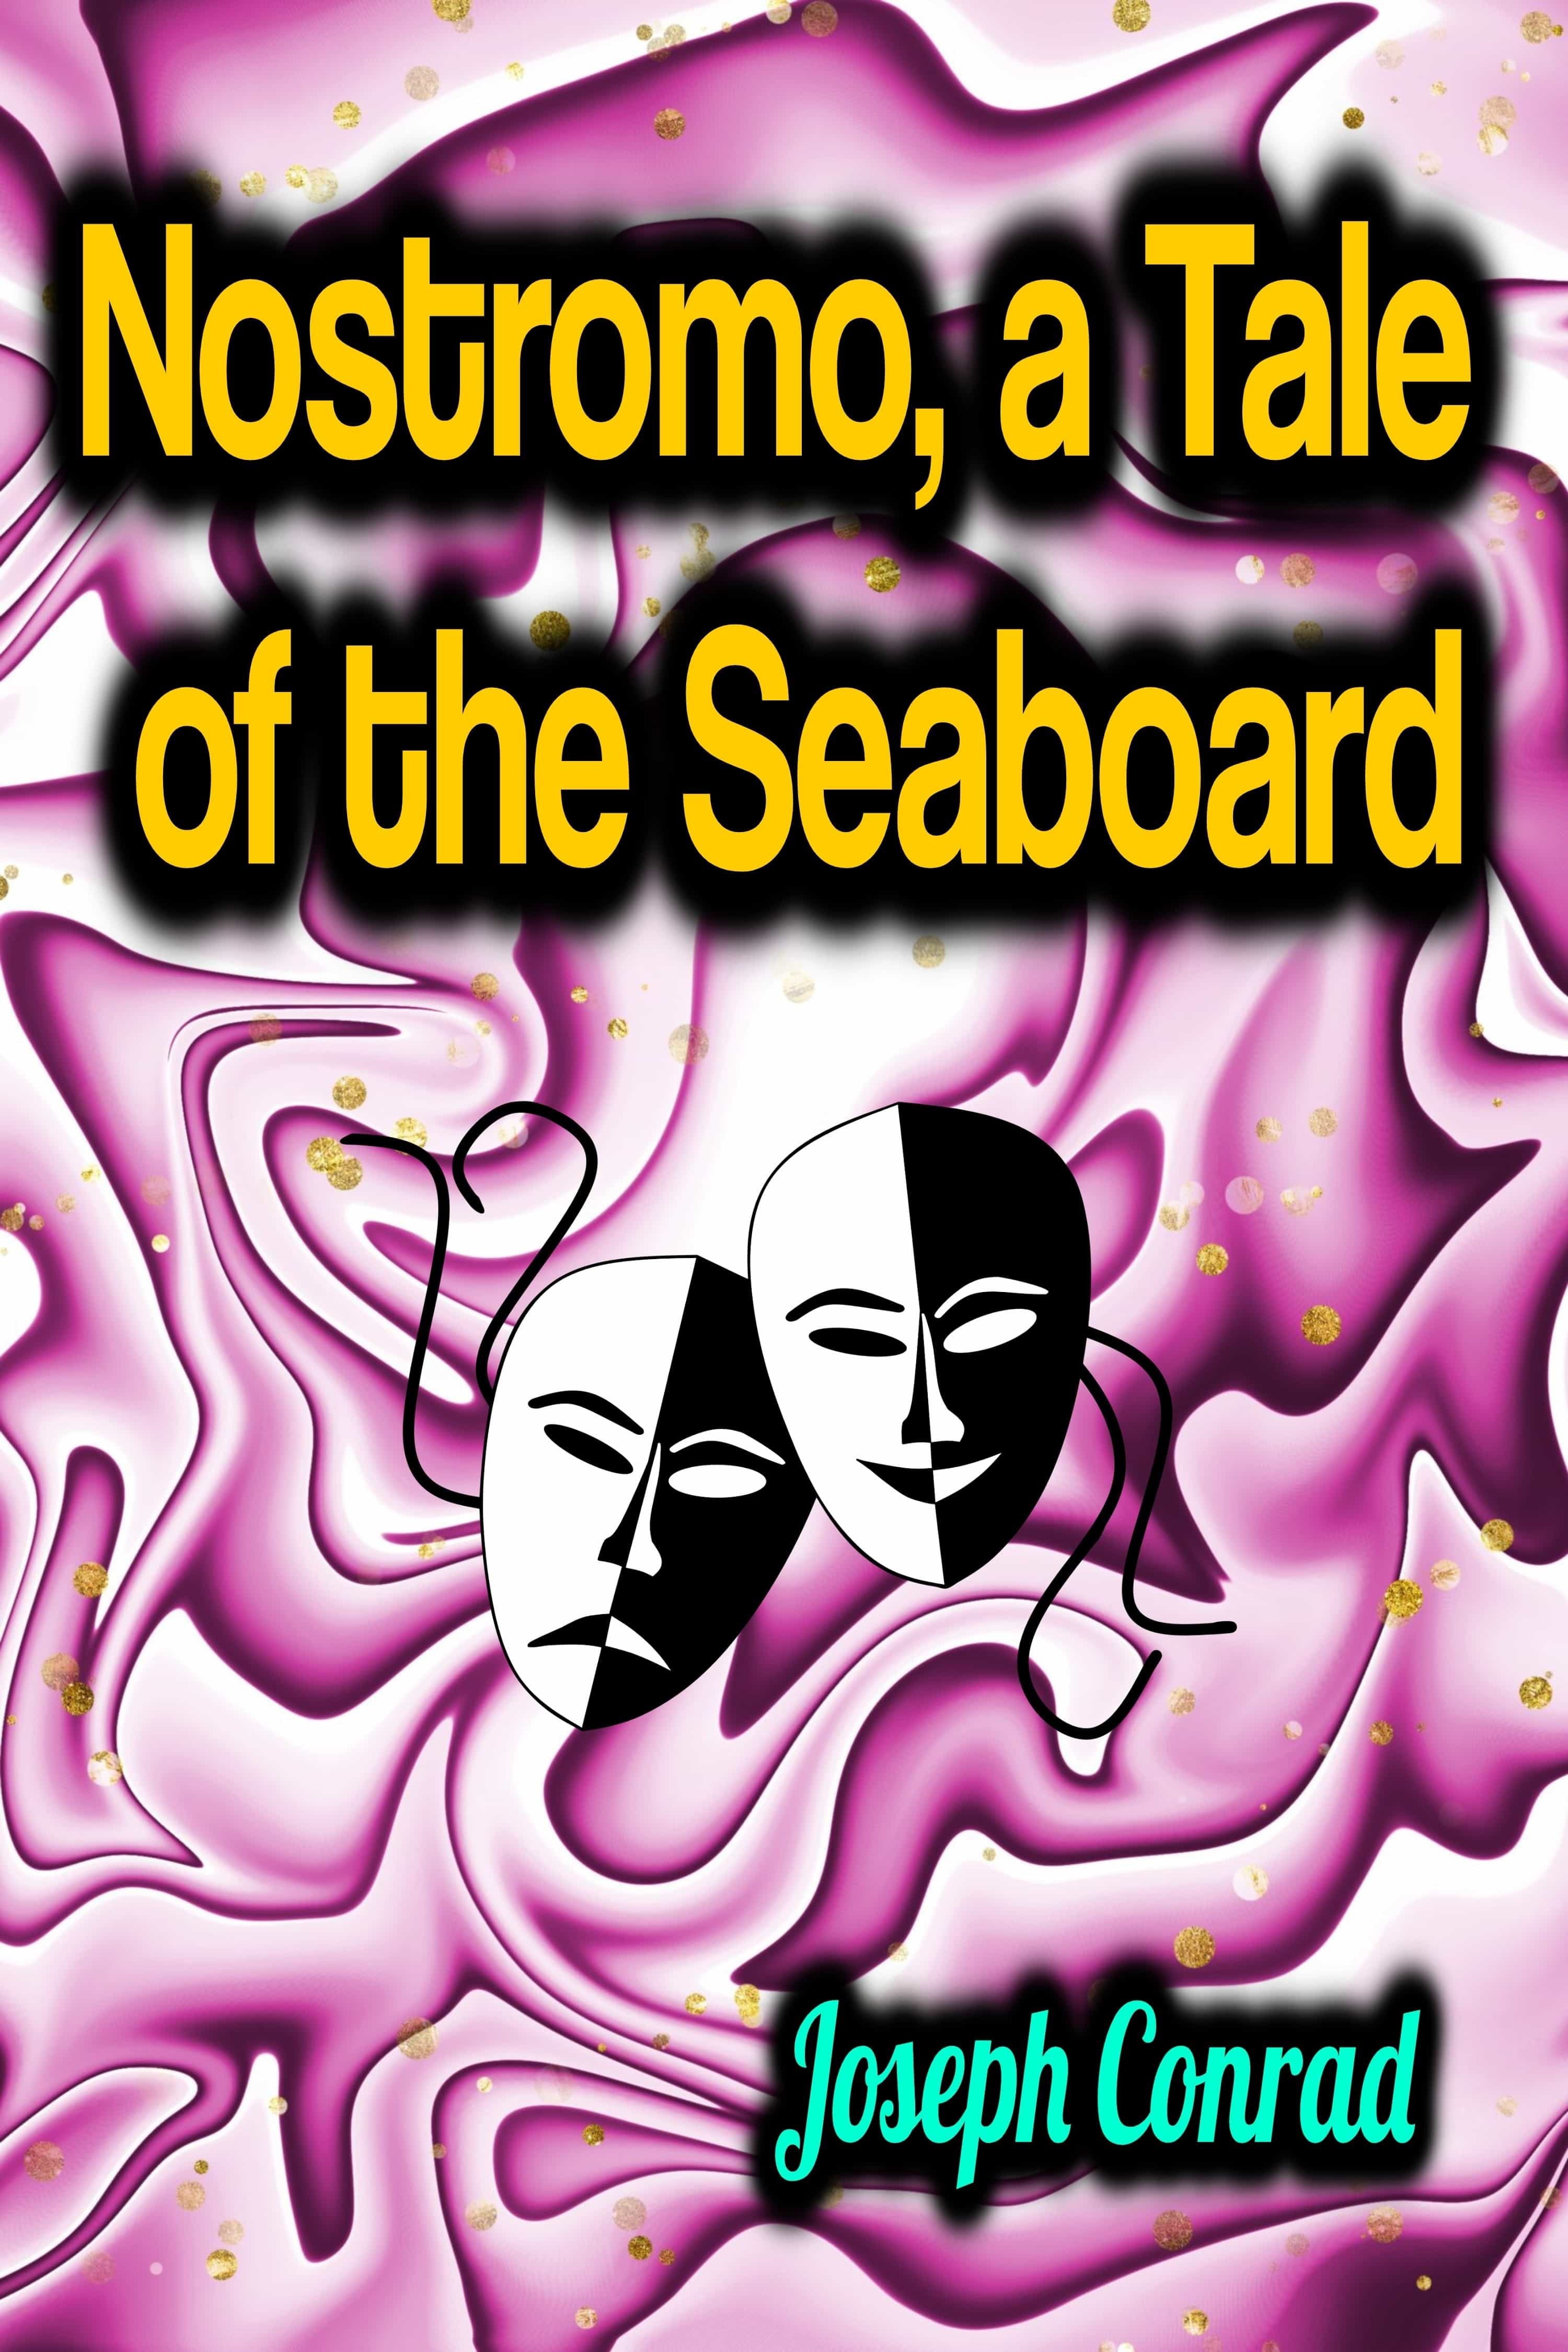 a tale of the seaboard